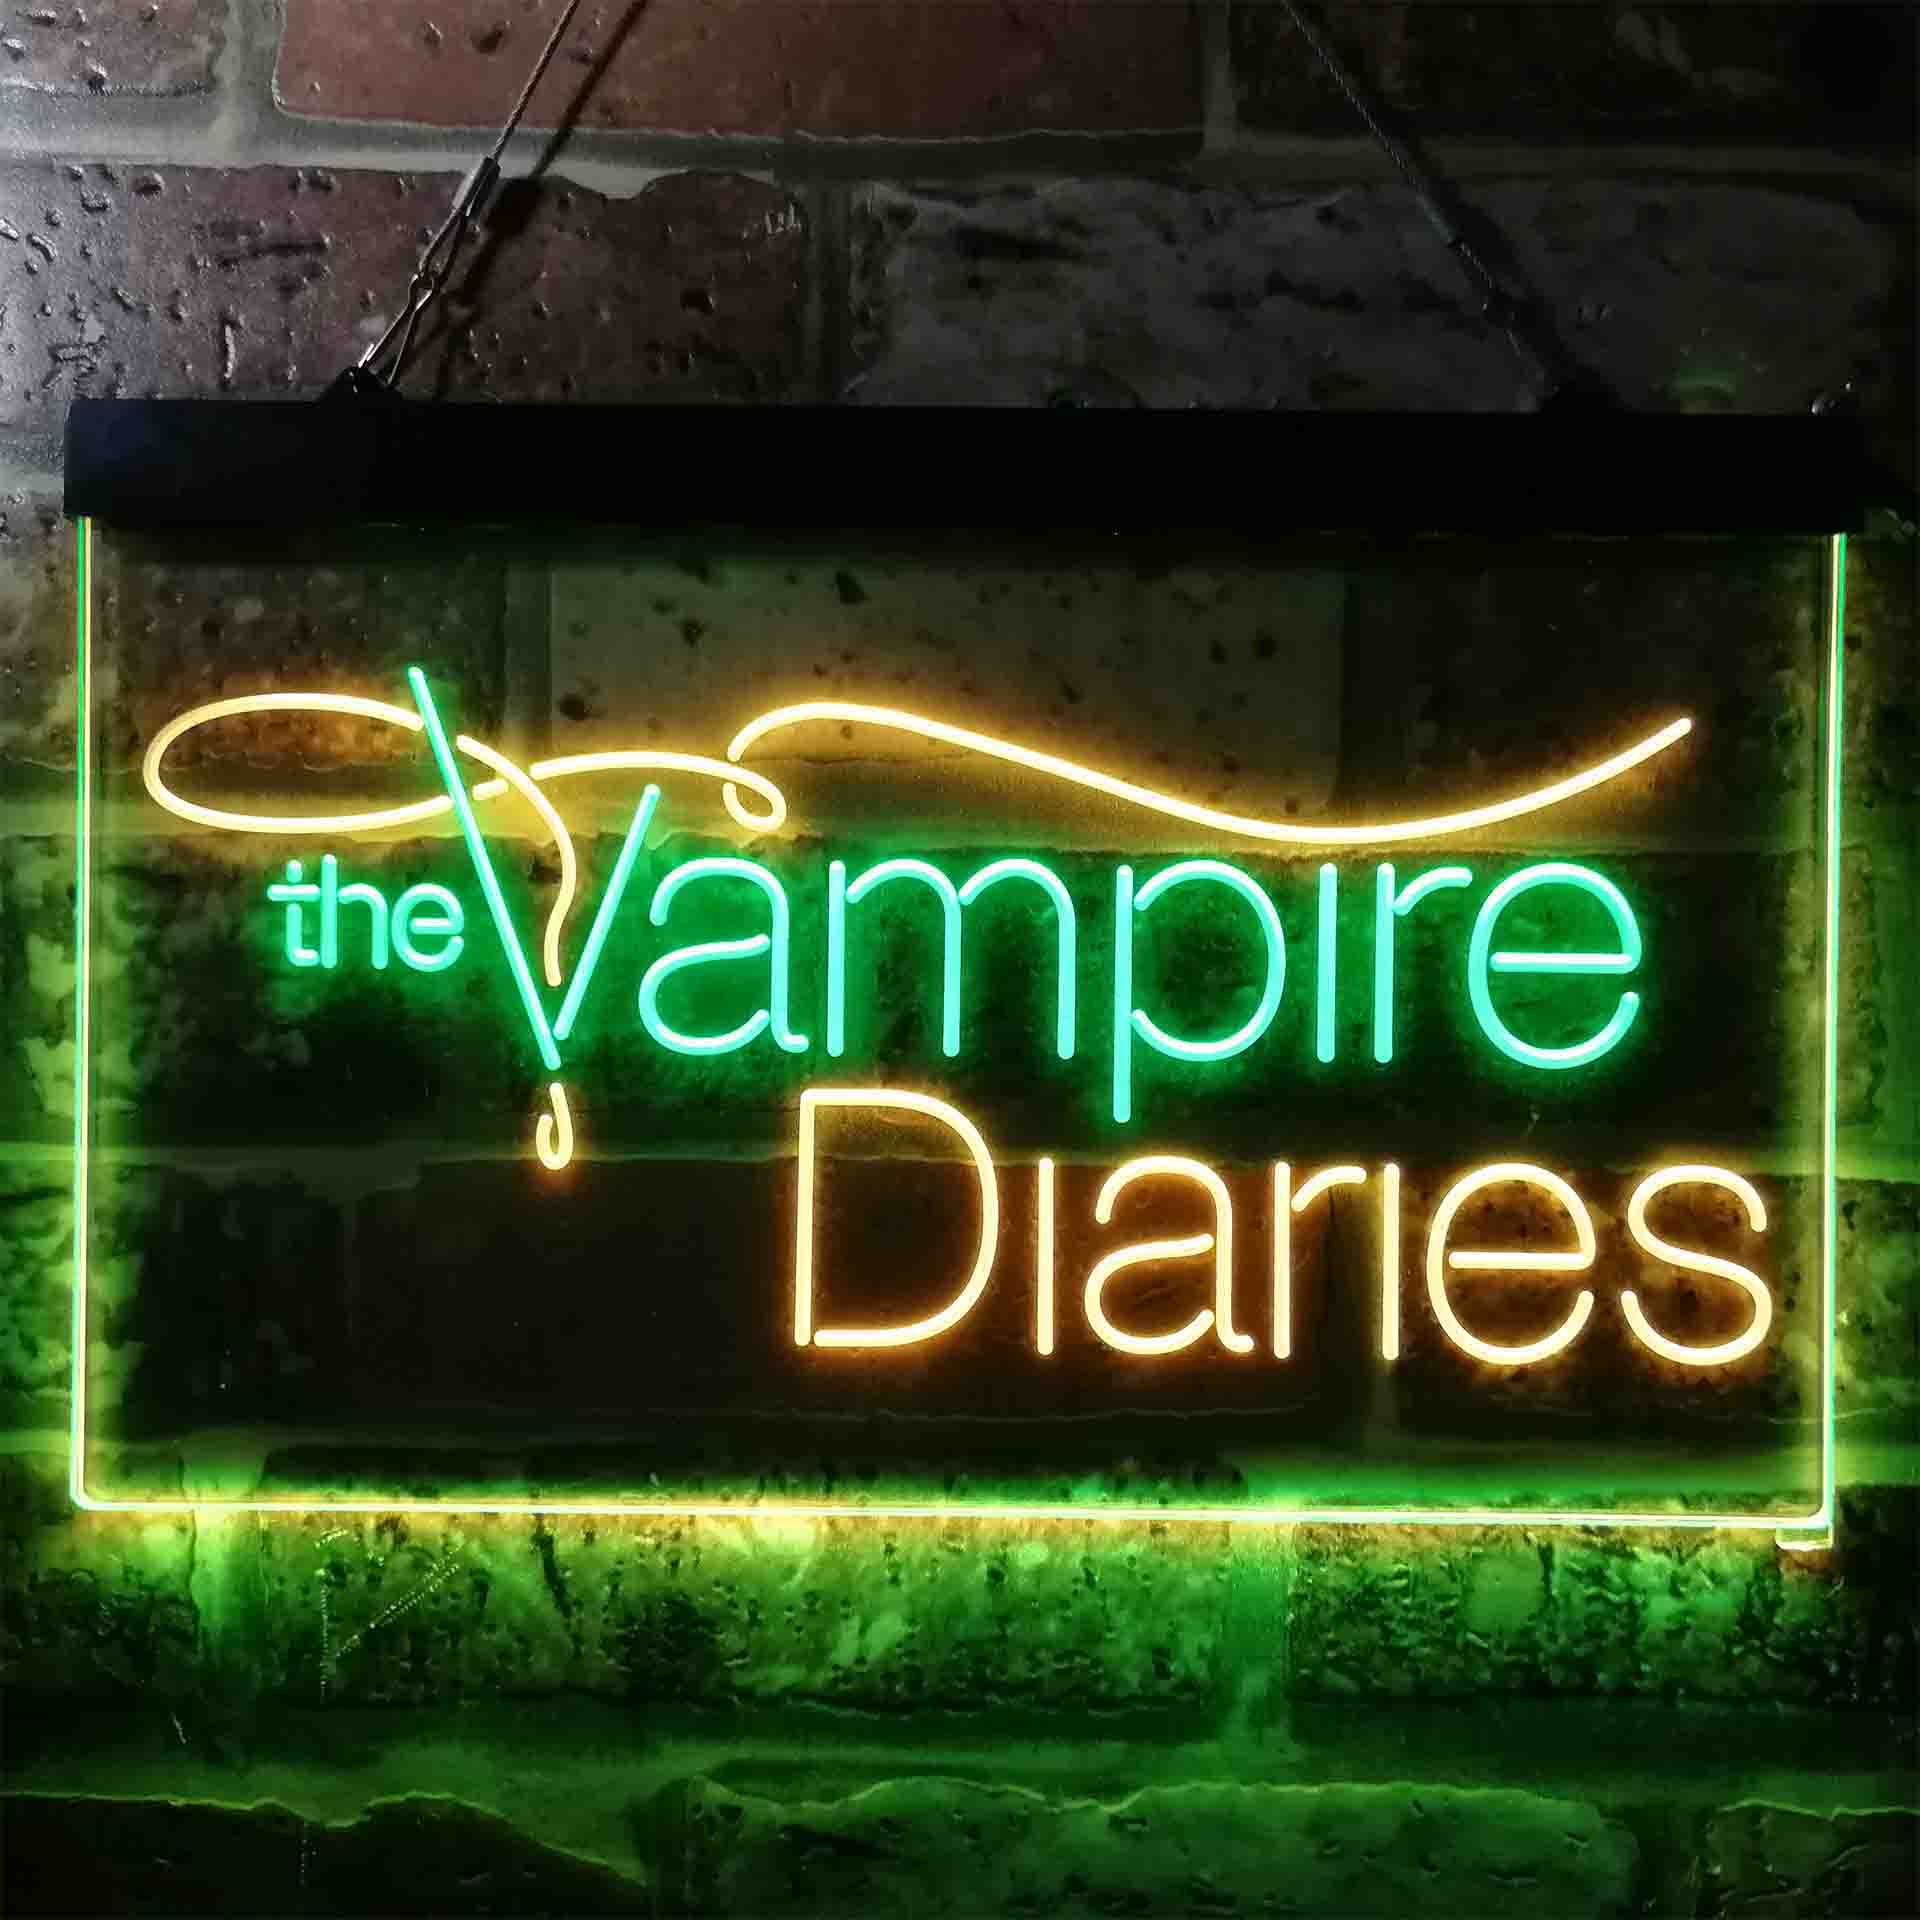 The Vampire Diaries Neon LED Sign